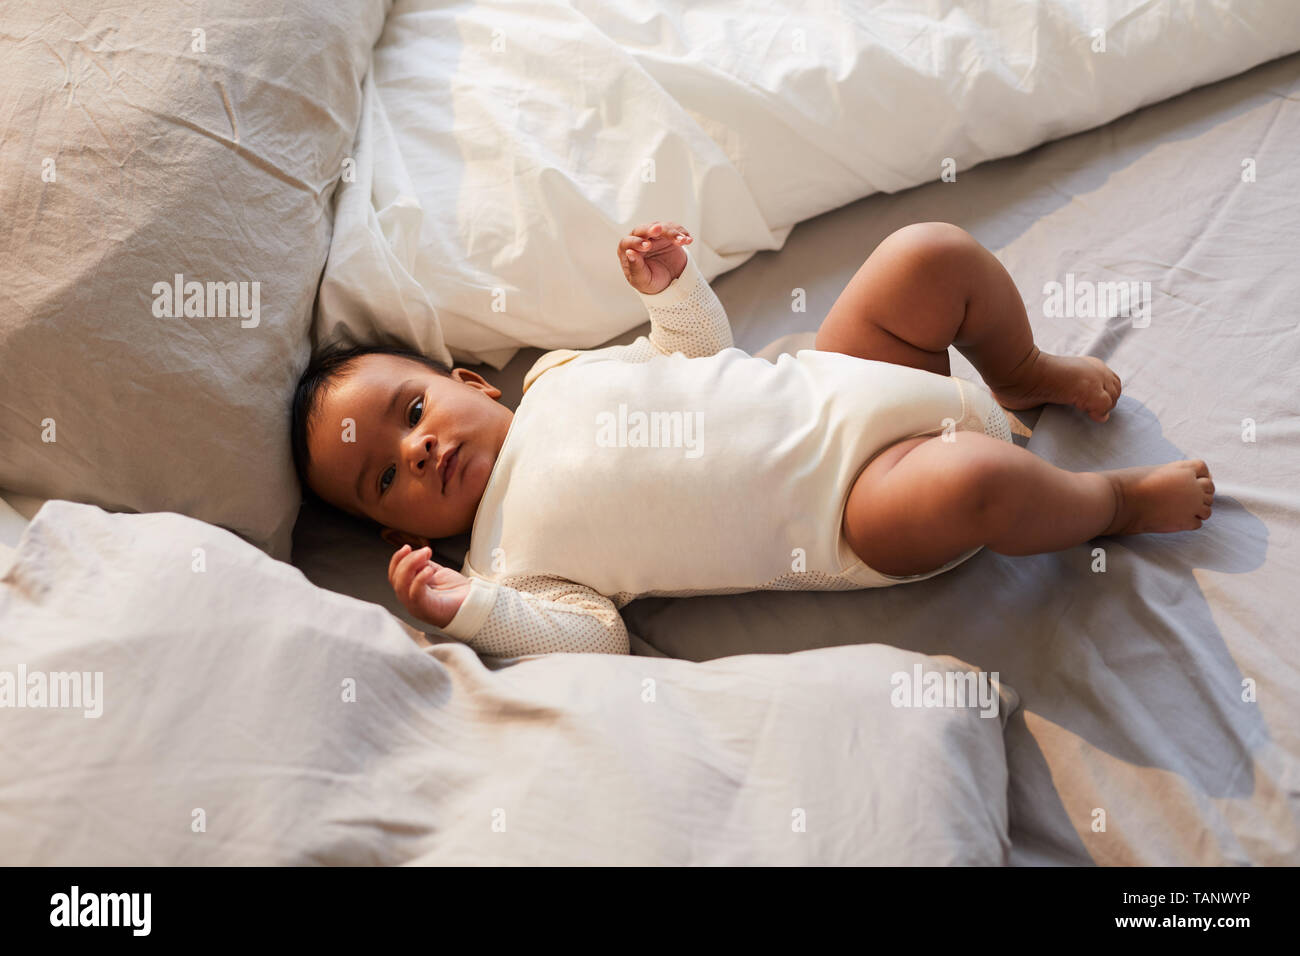 Portrait of serious adorable African baby boy in bodysuit lying between pillows in comfortable bed Stock Photo